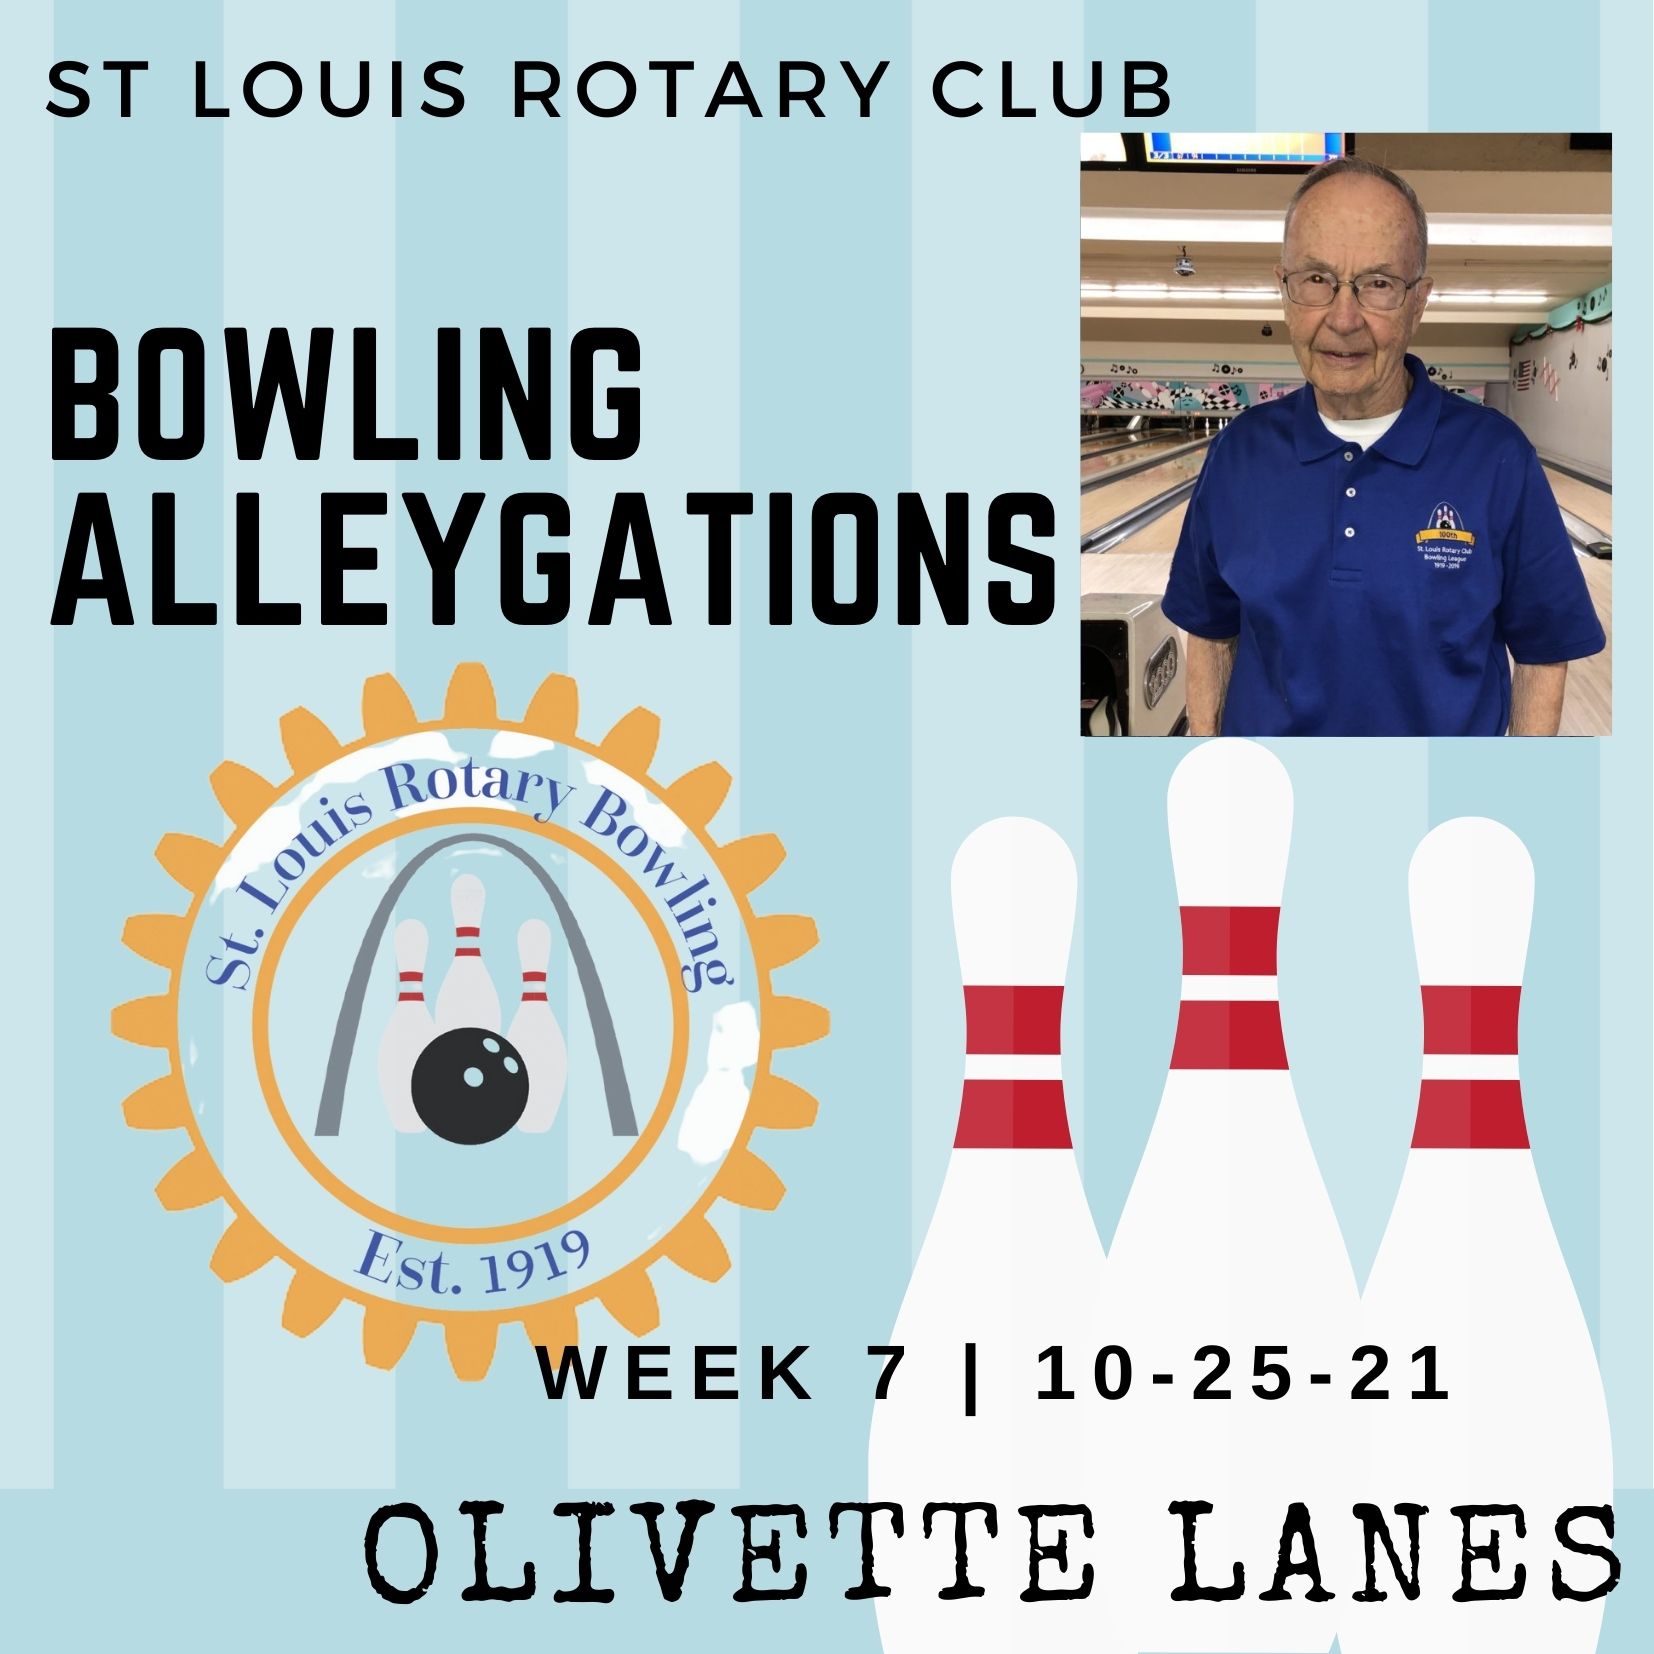 Bowling Alleygations Week 7_ 10-25-21